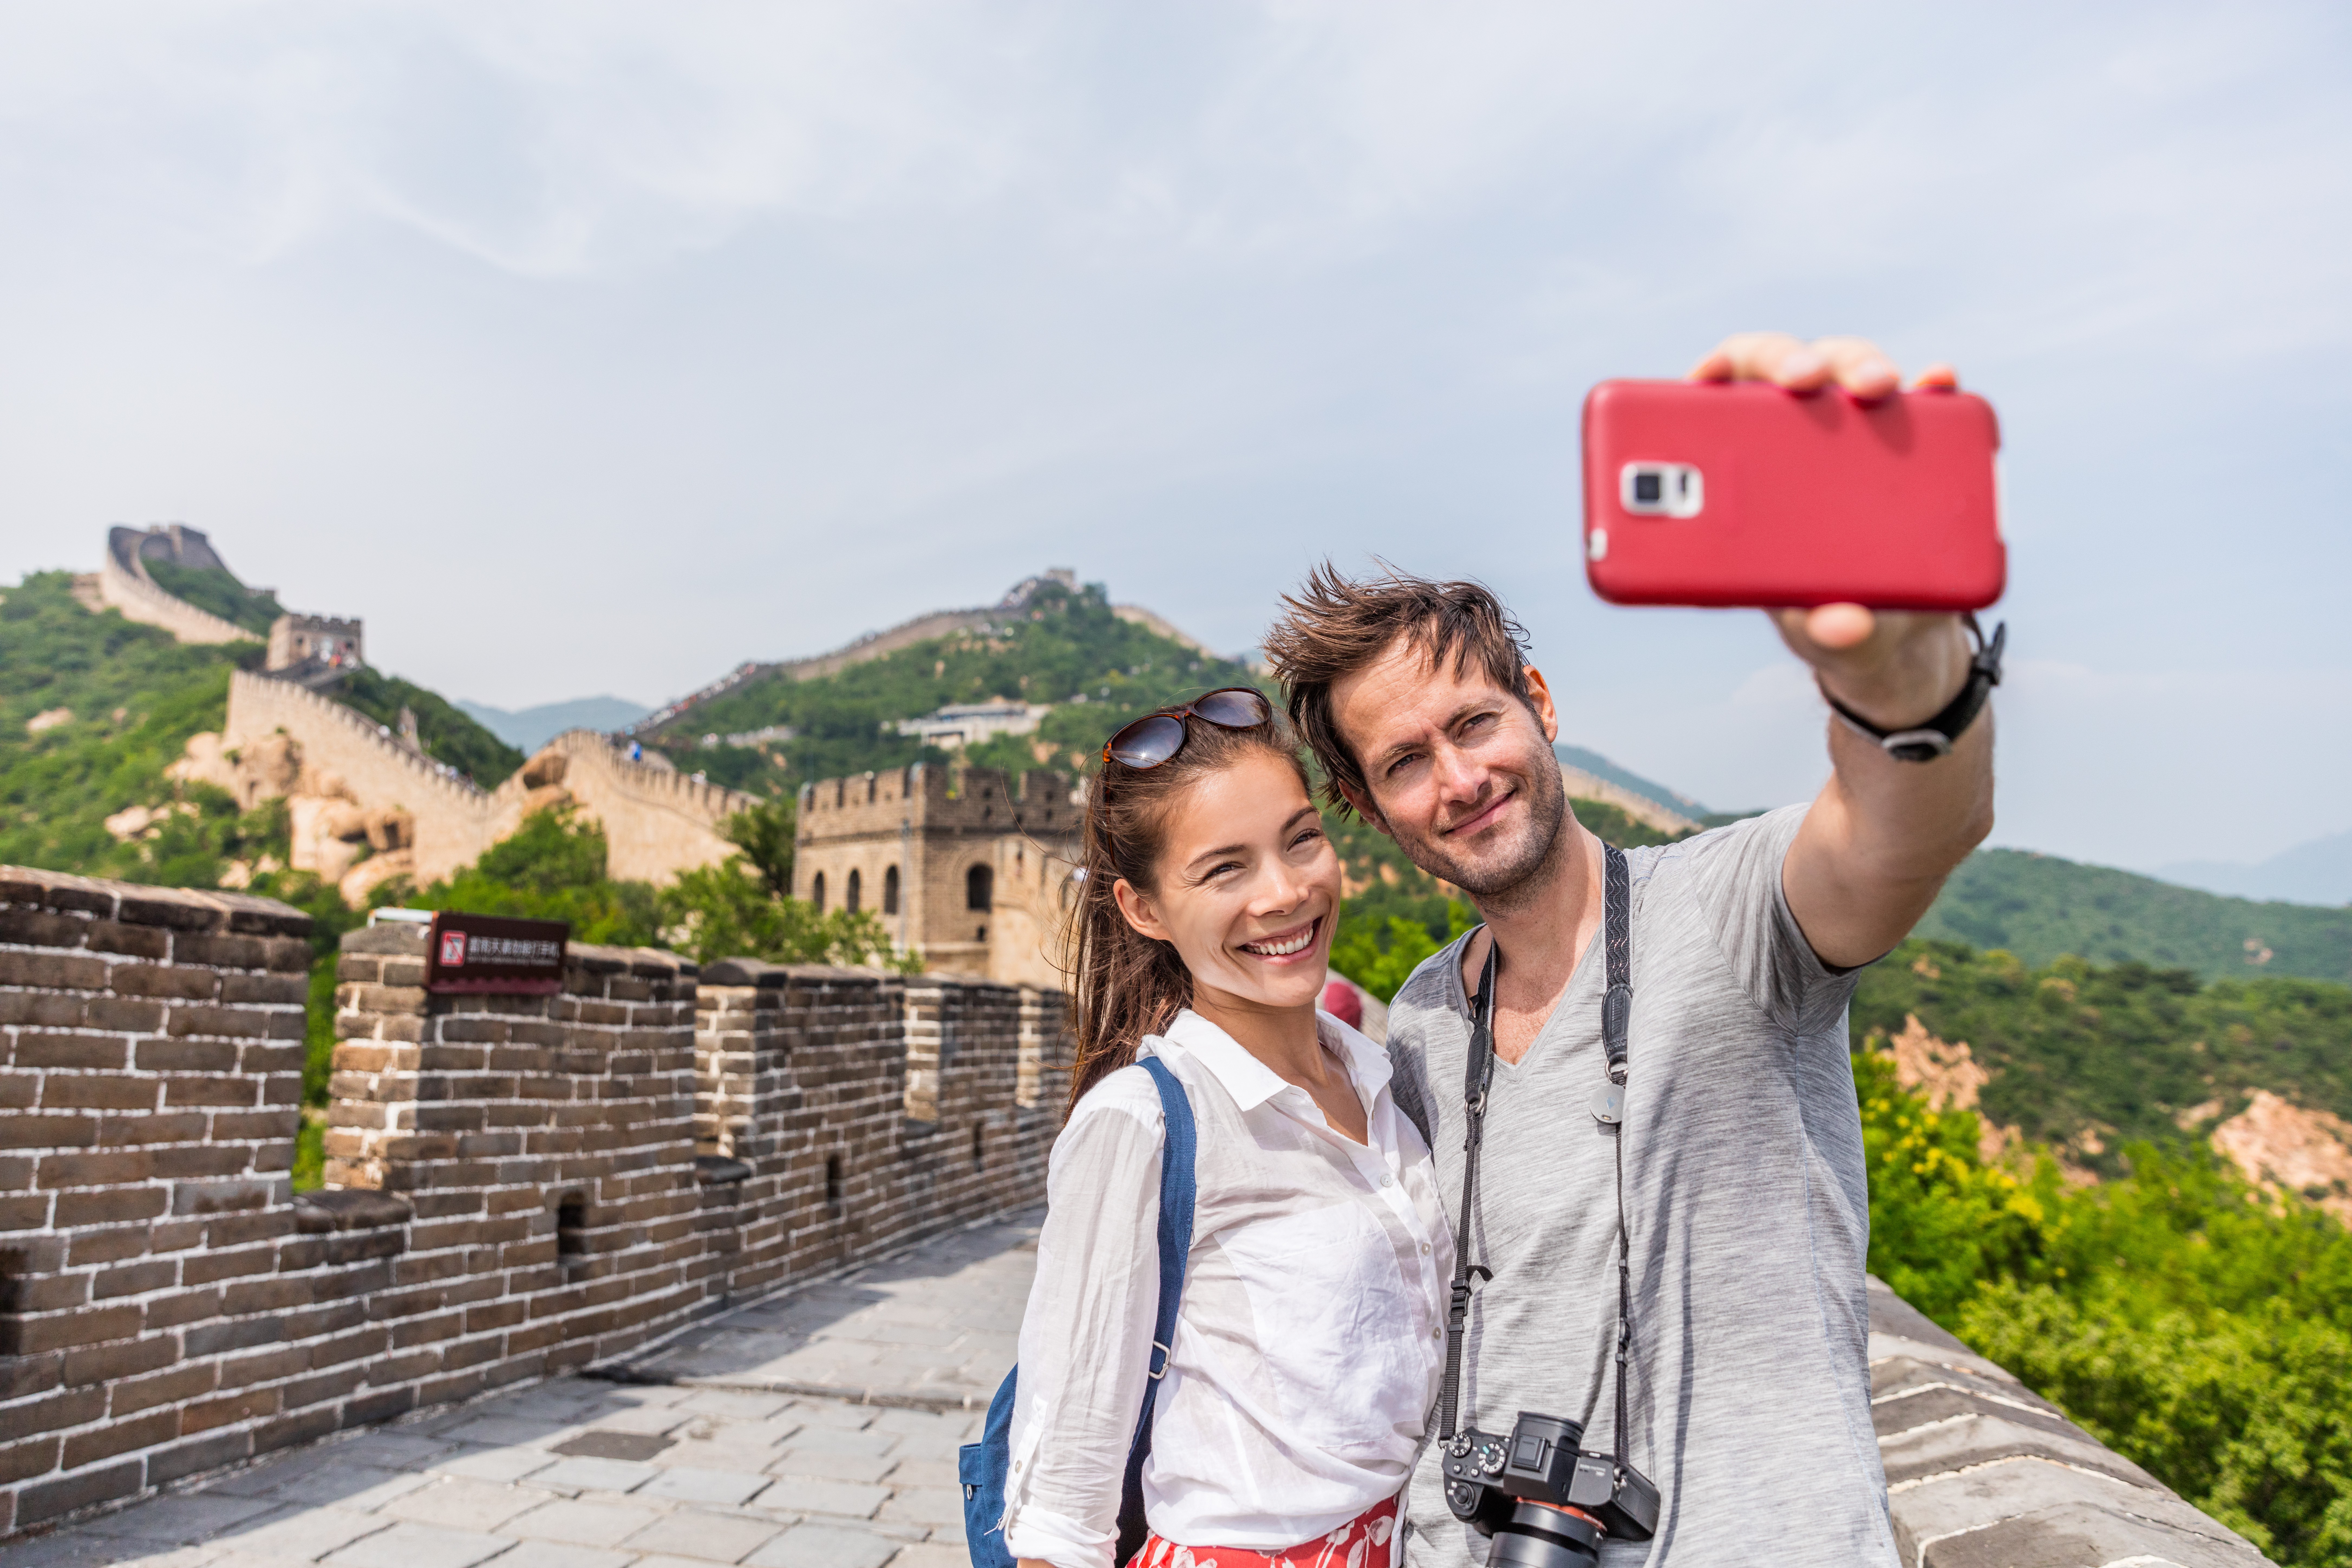 Excluding tourists from Hong Kong, Macau and Taiwan from China’s 139 million inbound tourists in 2018, China only receives around 30 million foreign visitors per year. Photo: Shutterstock